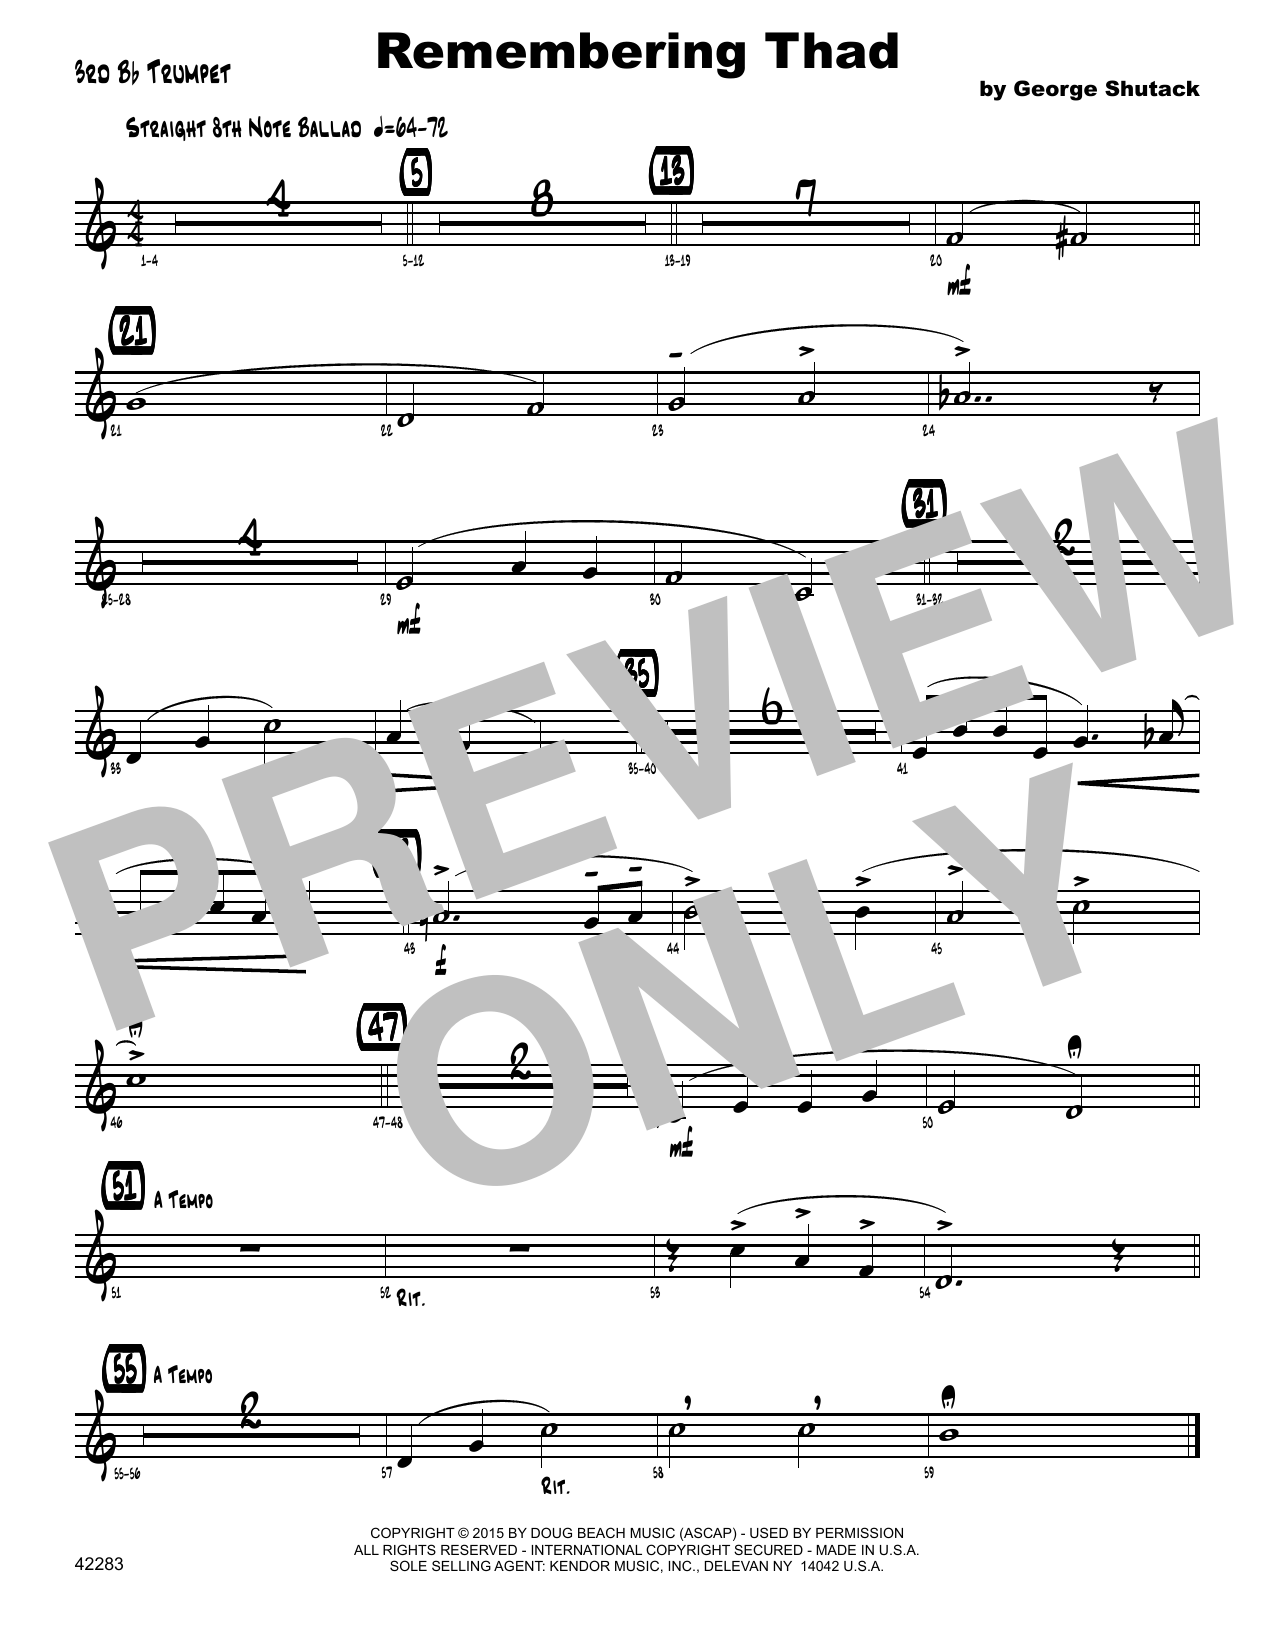 Download George Shutack Remembering Thad - 3rd Bb Trumpet Sheet Music